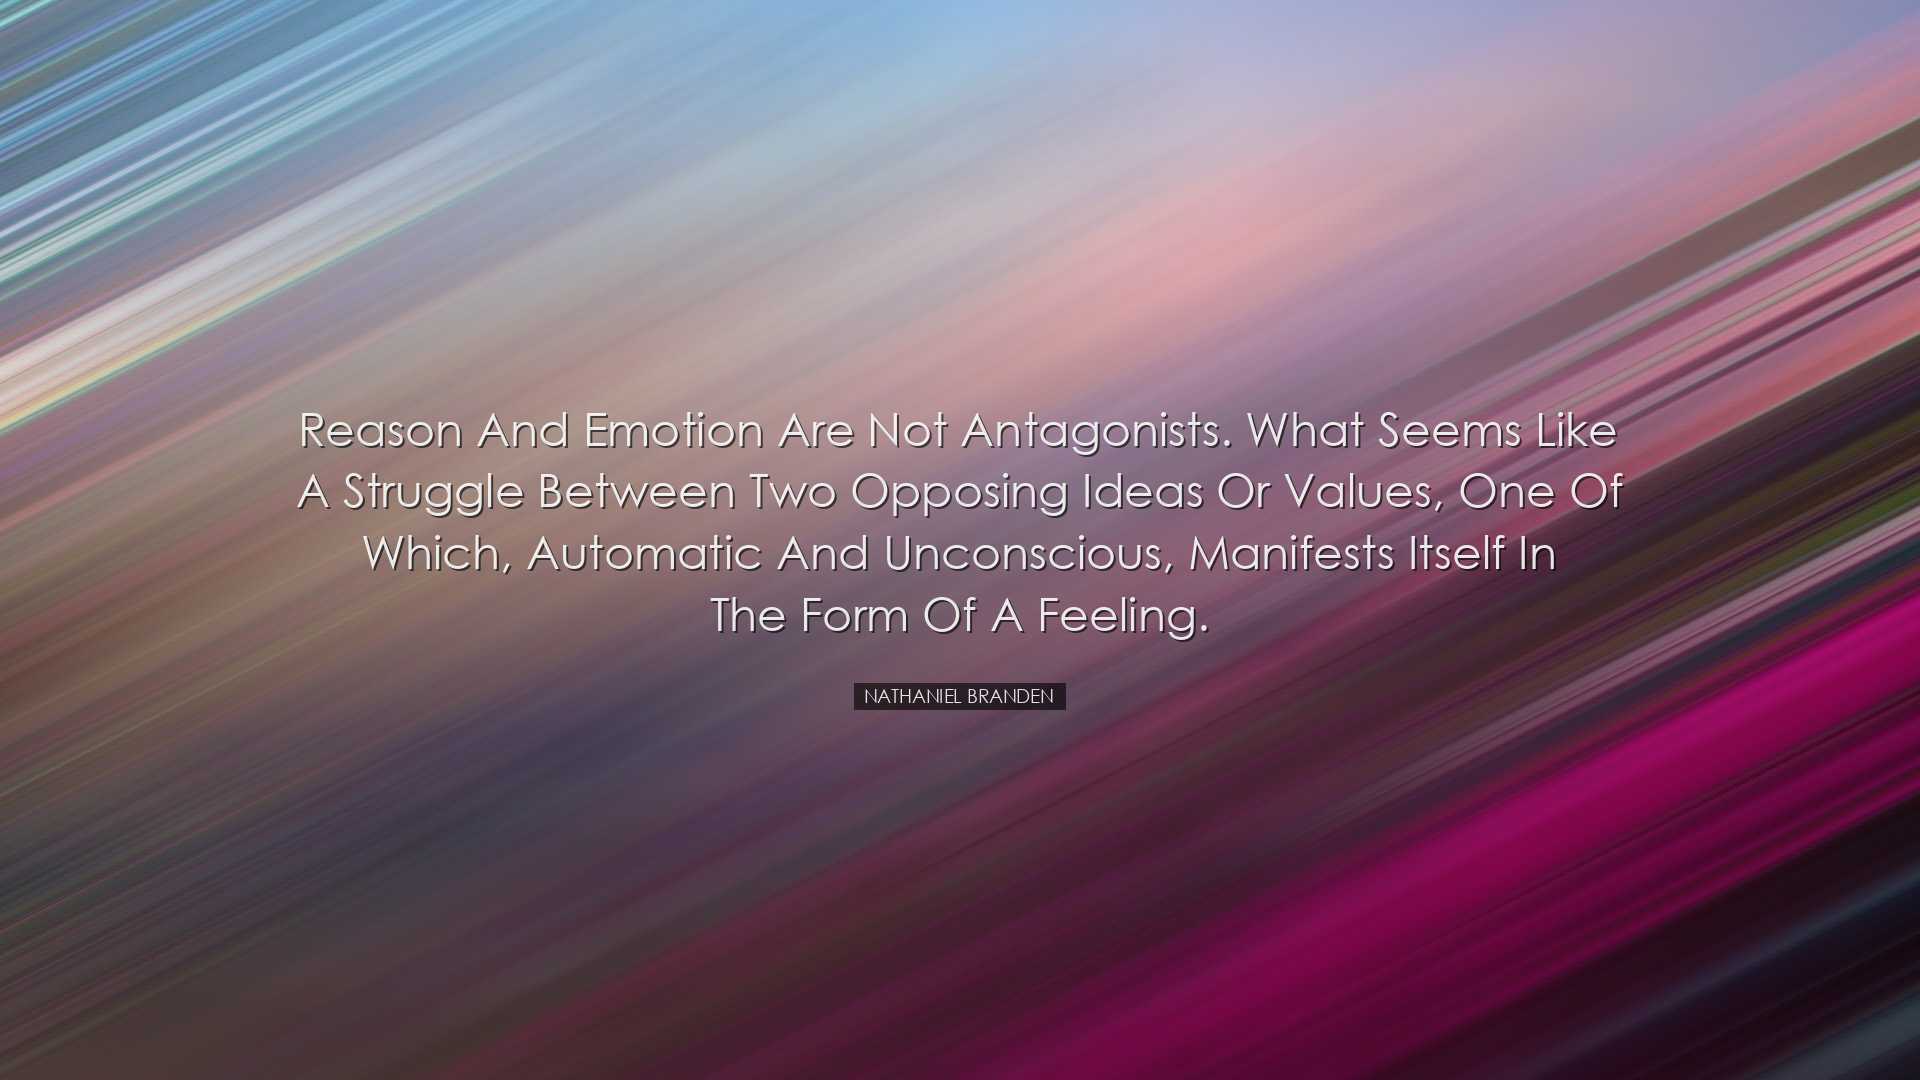 Reason and emotion are not antagonists. What seems like a struggle